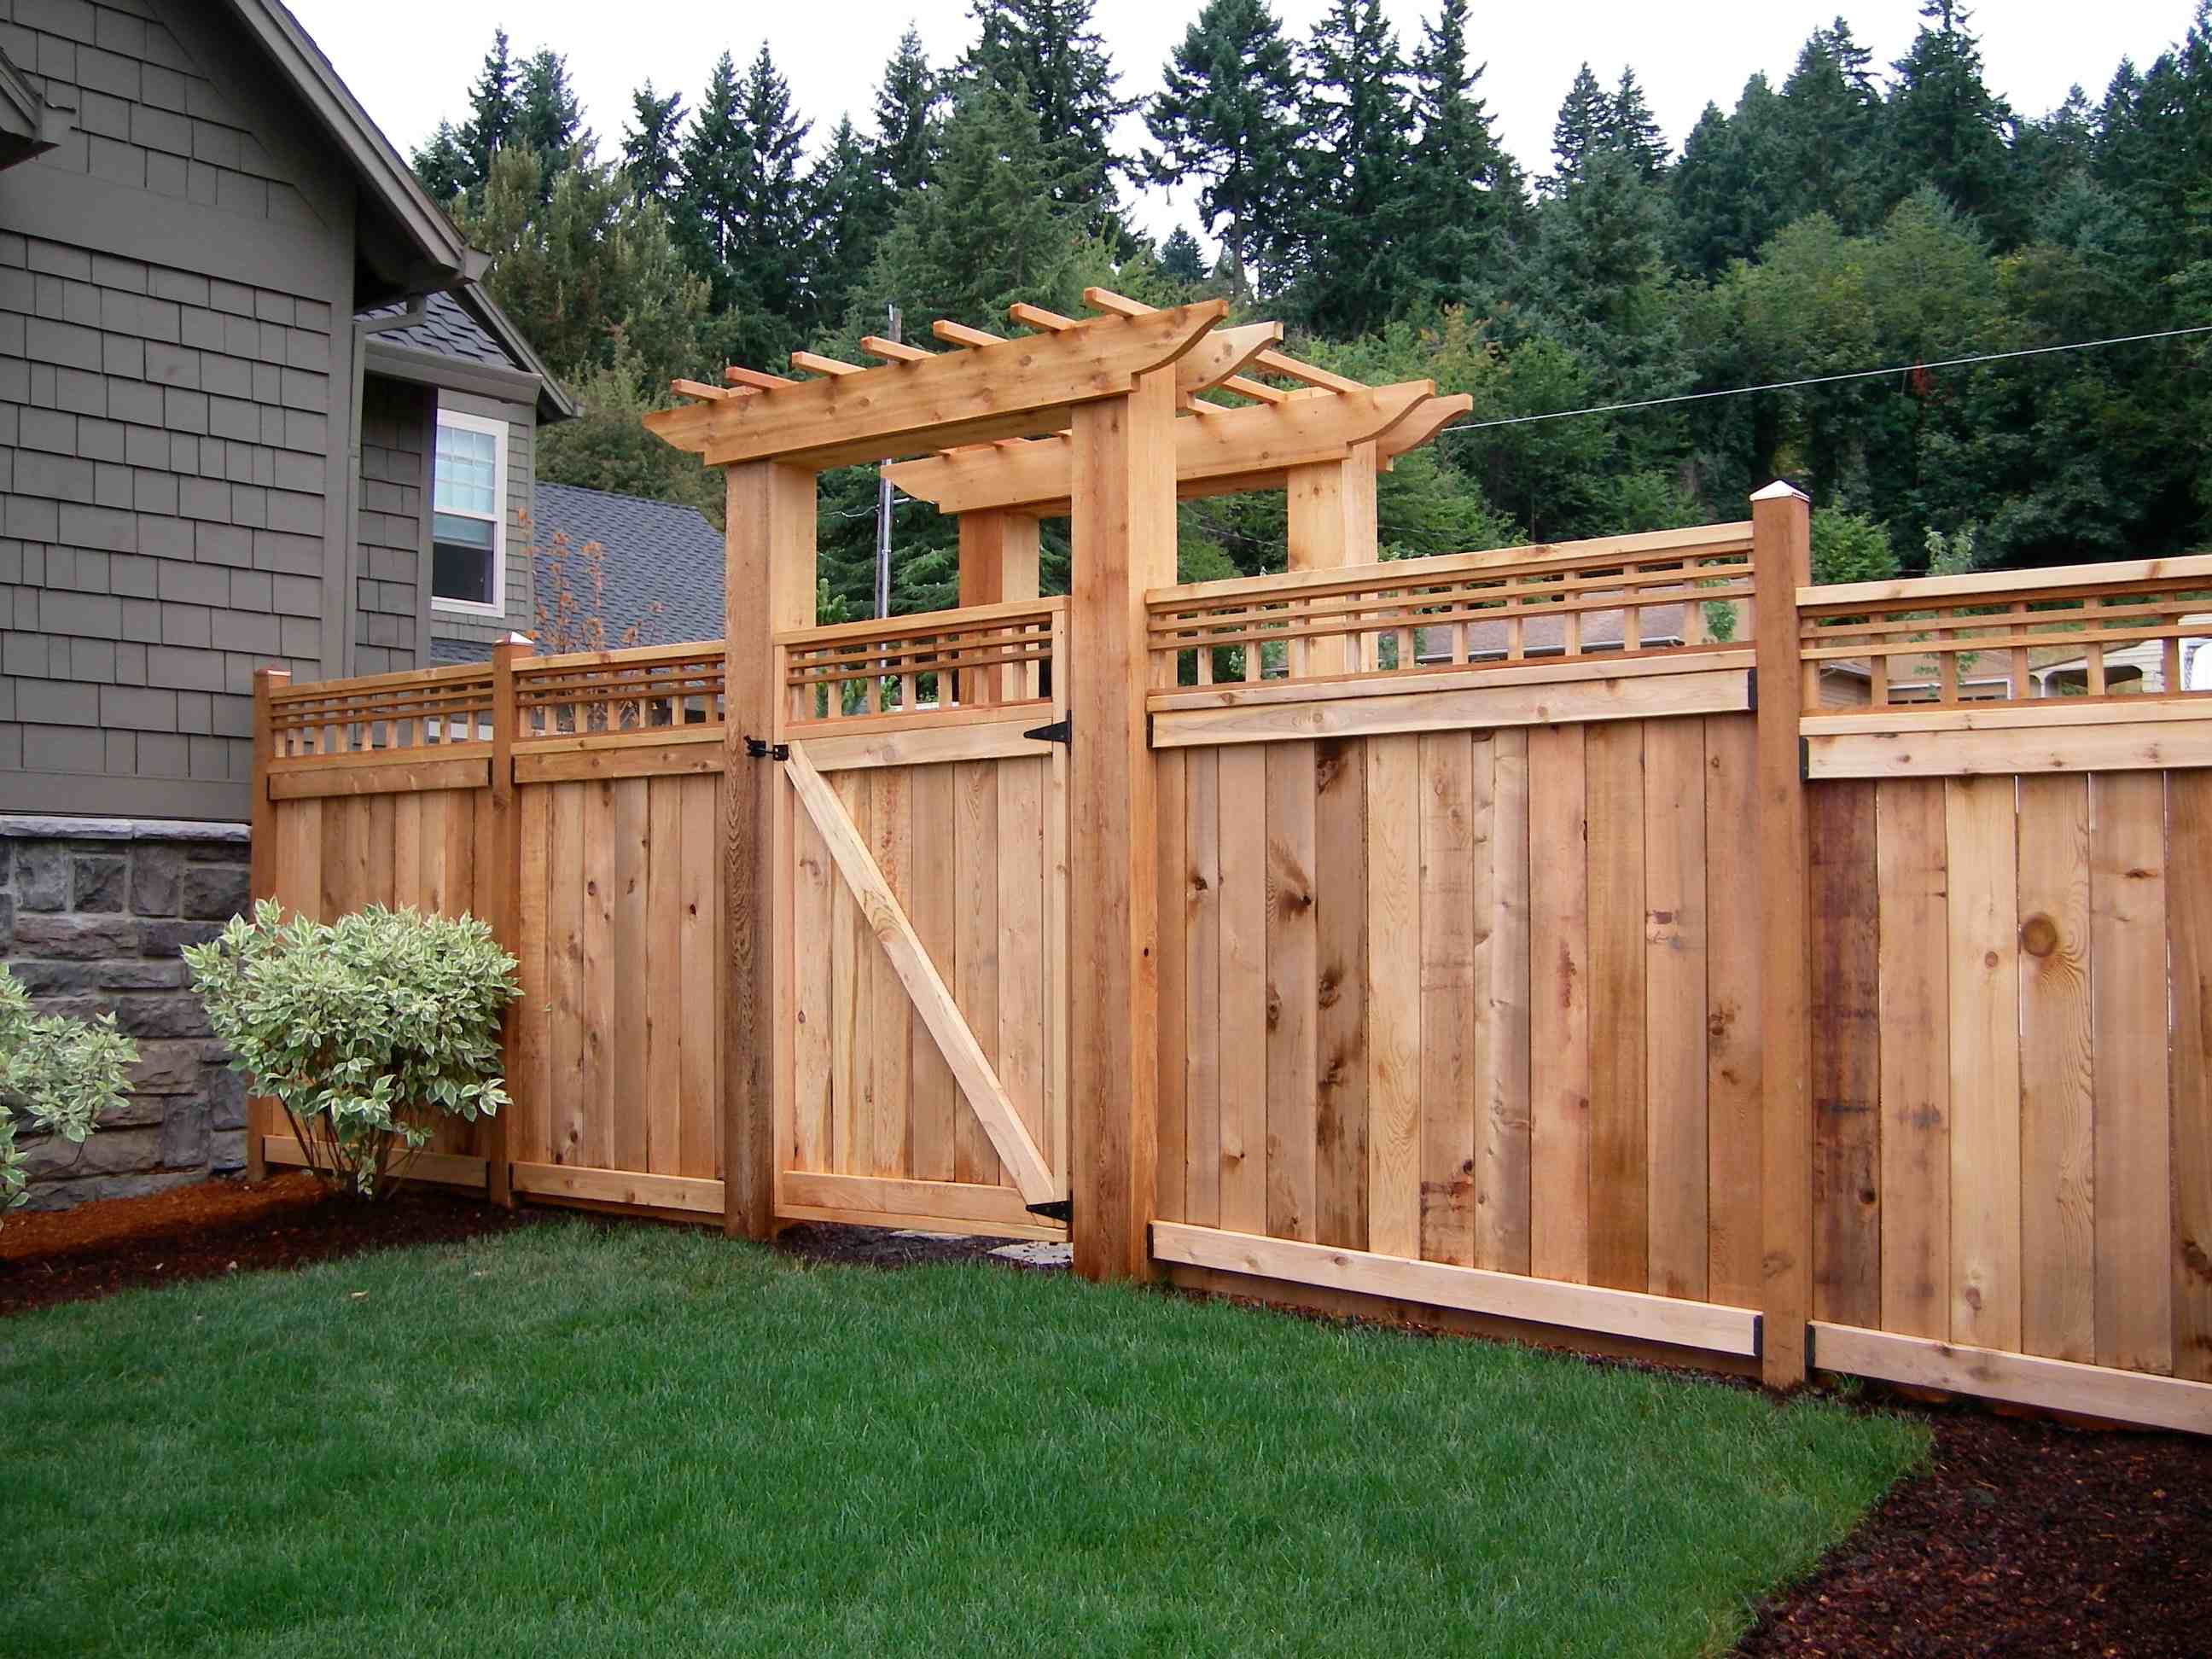 Wood Fence Gates Pictures - Google Search | Backyard gates, Wood fence ...